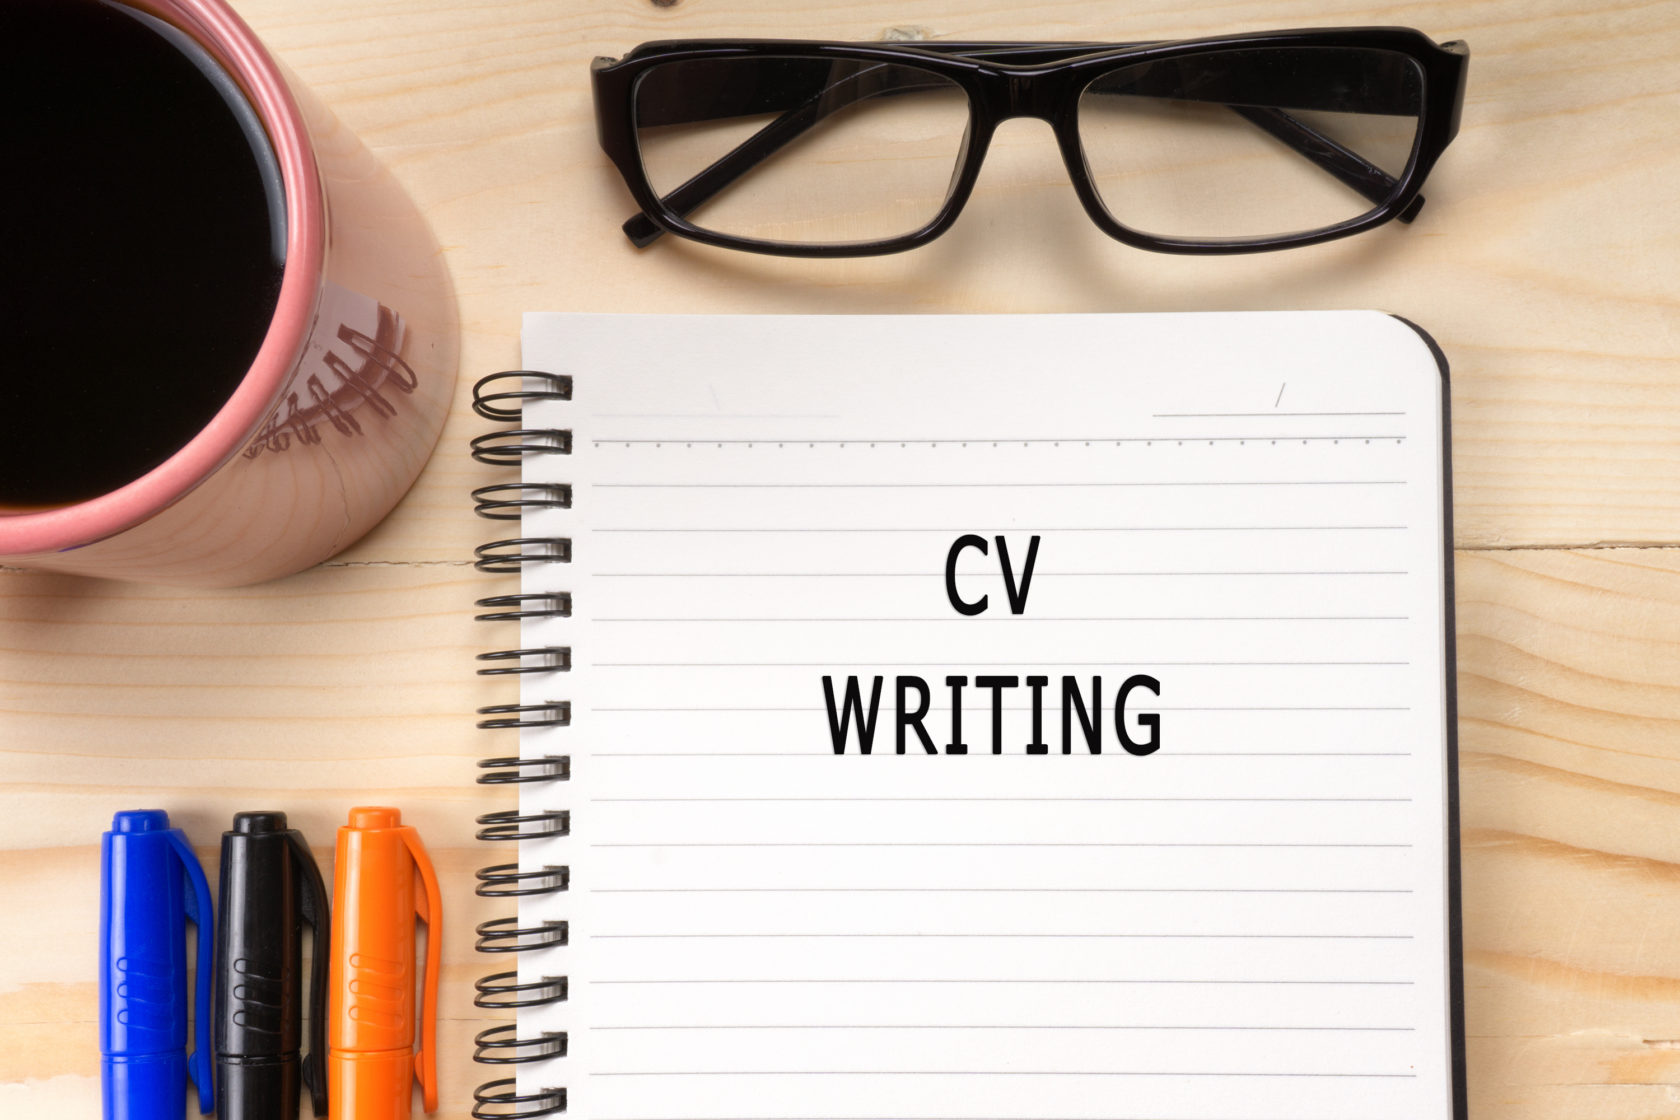 Contractor CV’s – Tips and Advice on How to Draft the Most Effective Contractor CV.